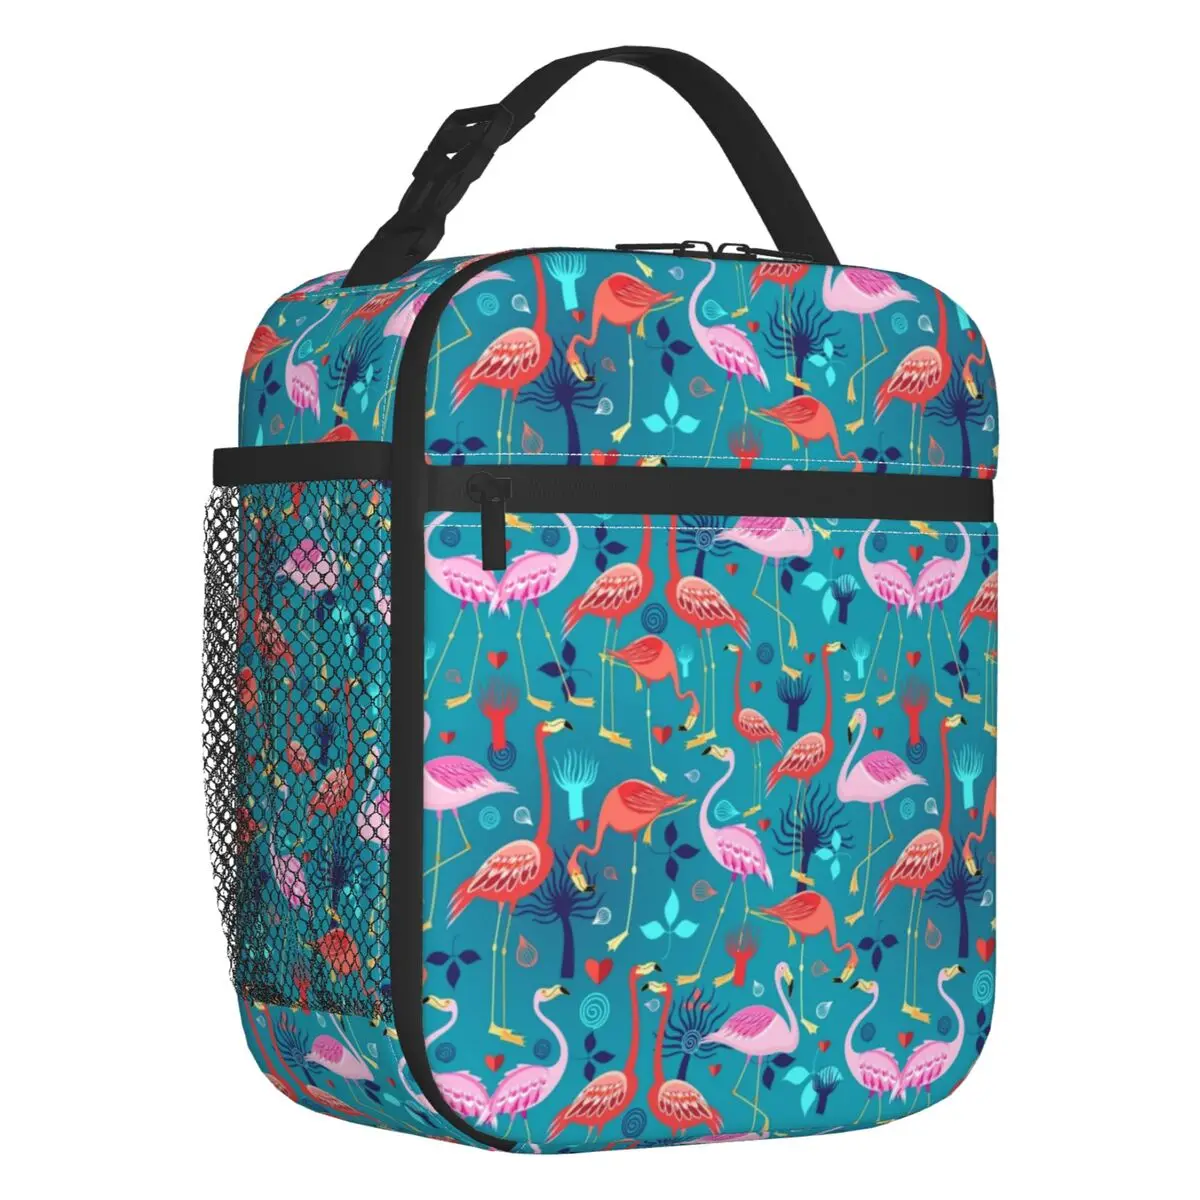 Beautiful Pattern Lovers Flamingo Insulated Lunch Tote Bag for Women Resuable Cooler Thermal Food Lunch Box Work School Travel